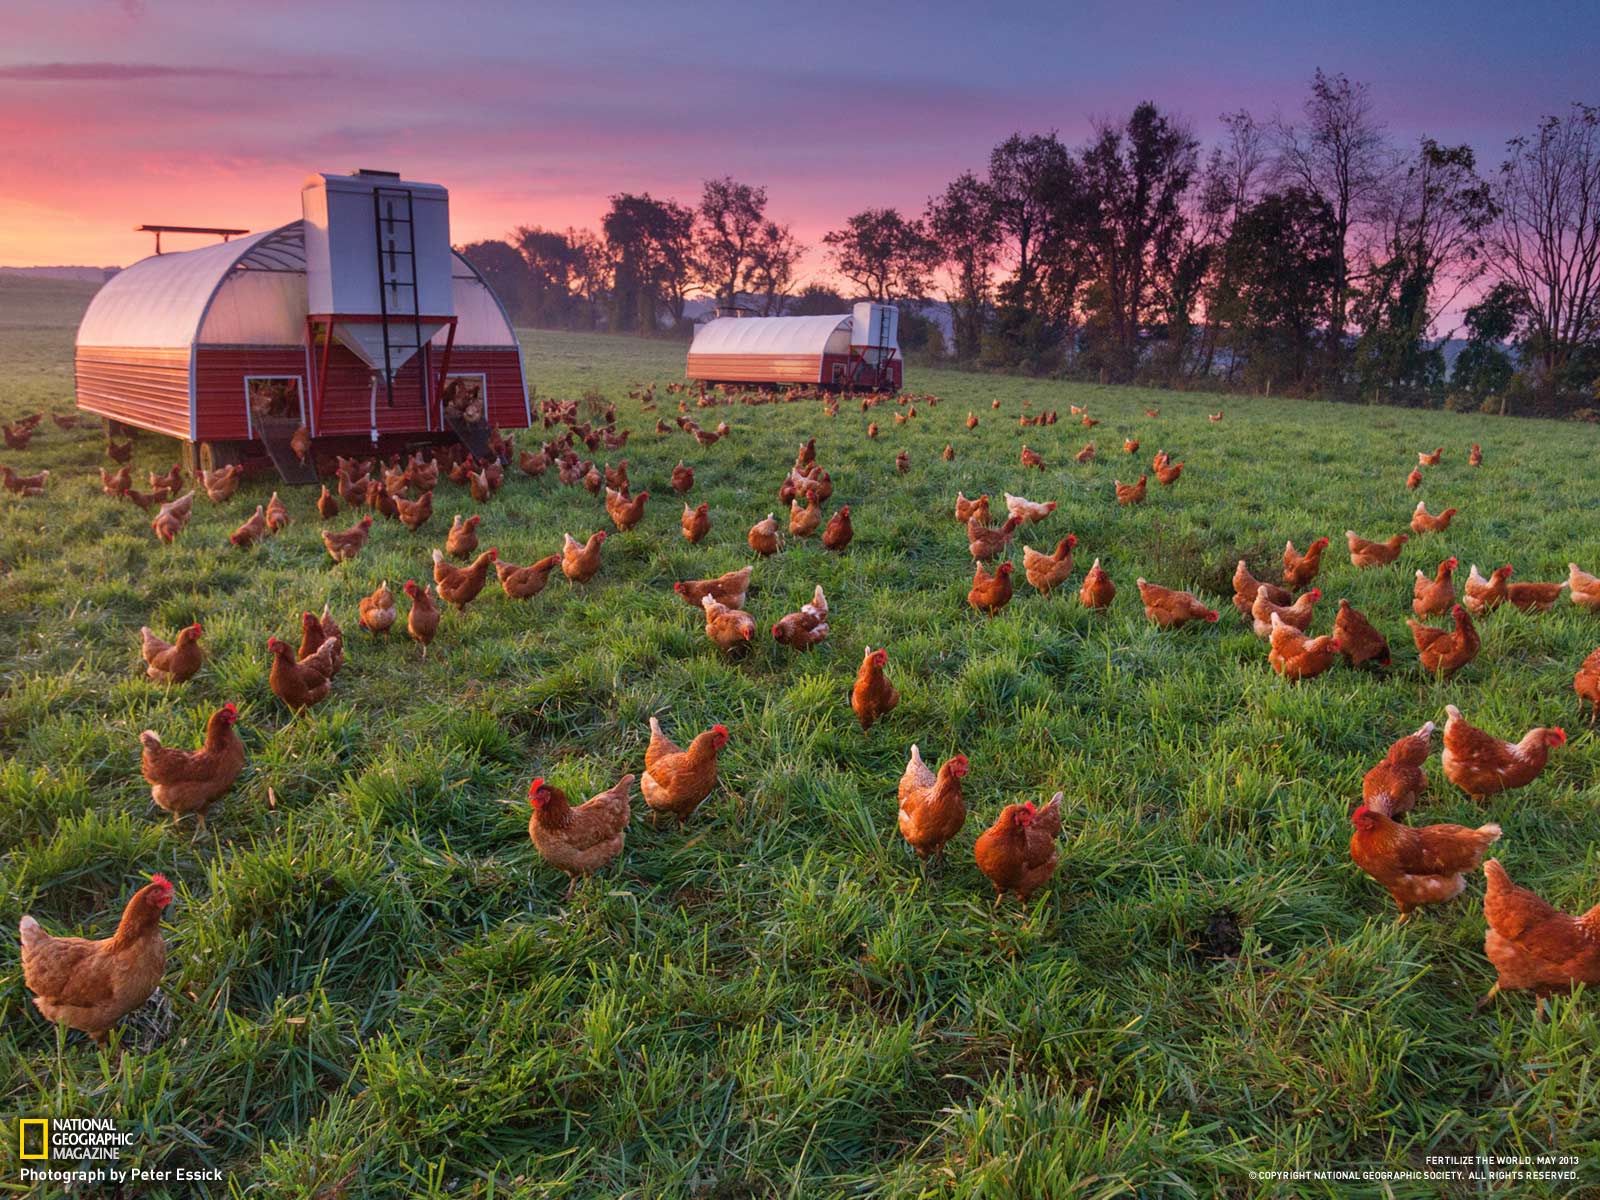 Free download From The Curse of Fertilizer National Geographic May 2013 [1600x1200] for your Desktop, Mobile & Tablet. Explore Wallpaper with Chickens. Funny Chicken Wallpaper